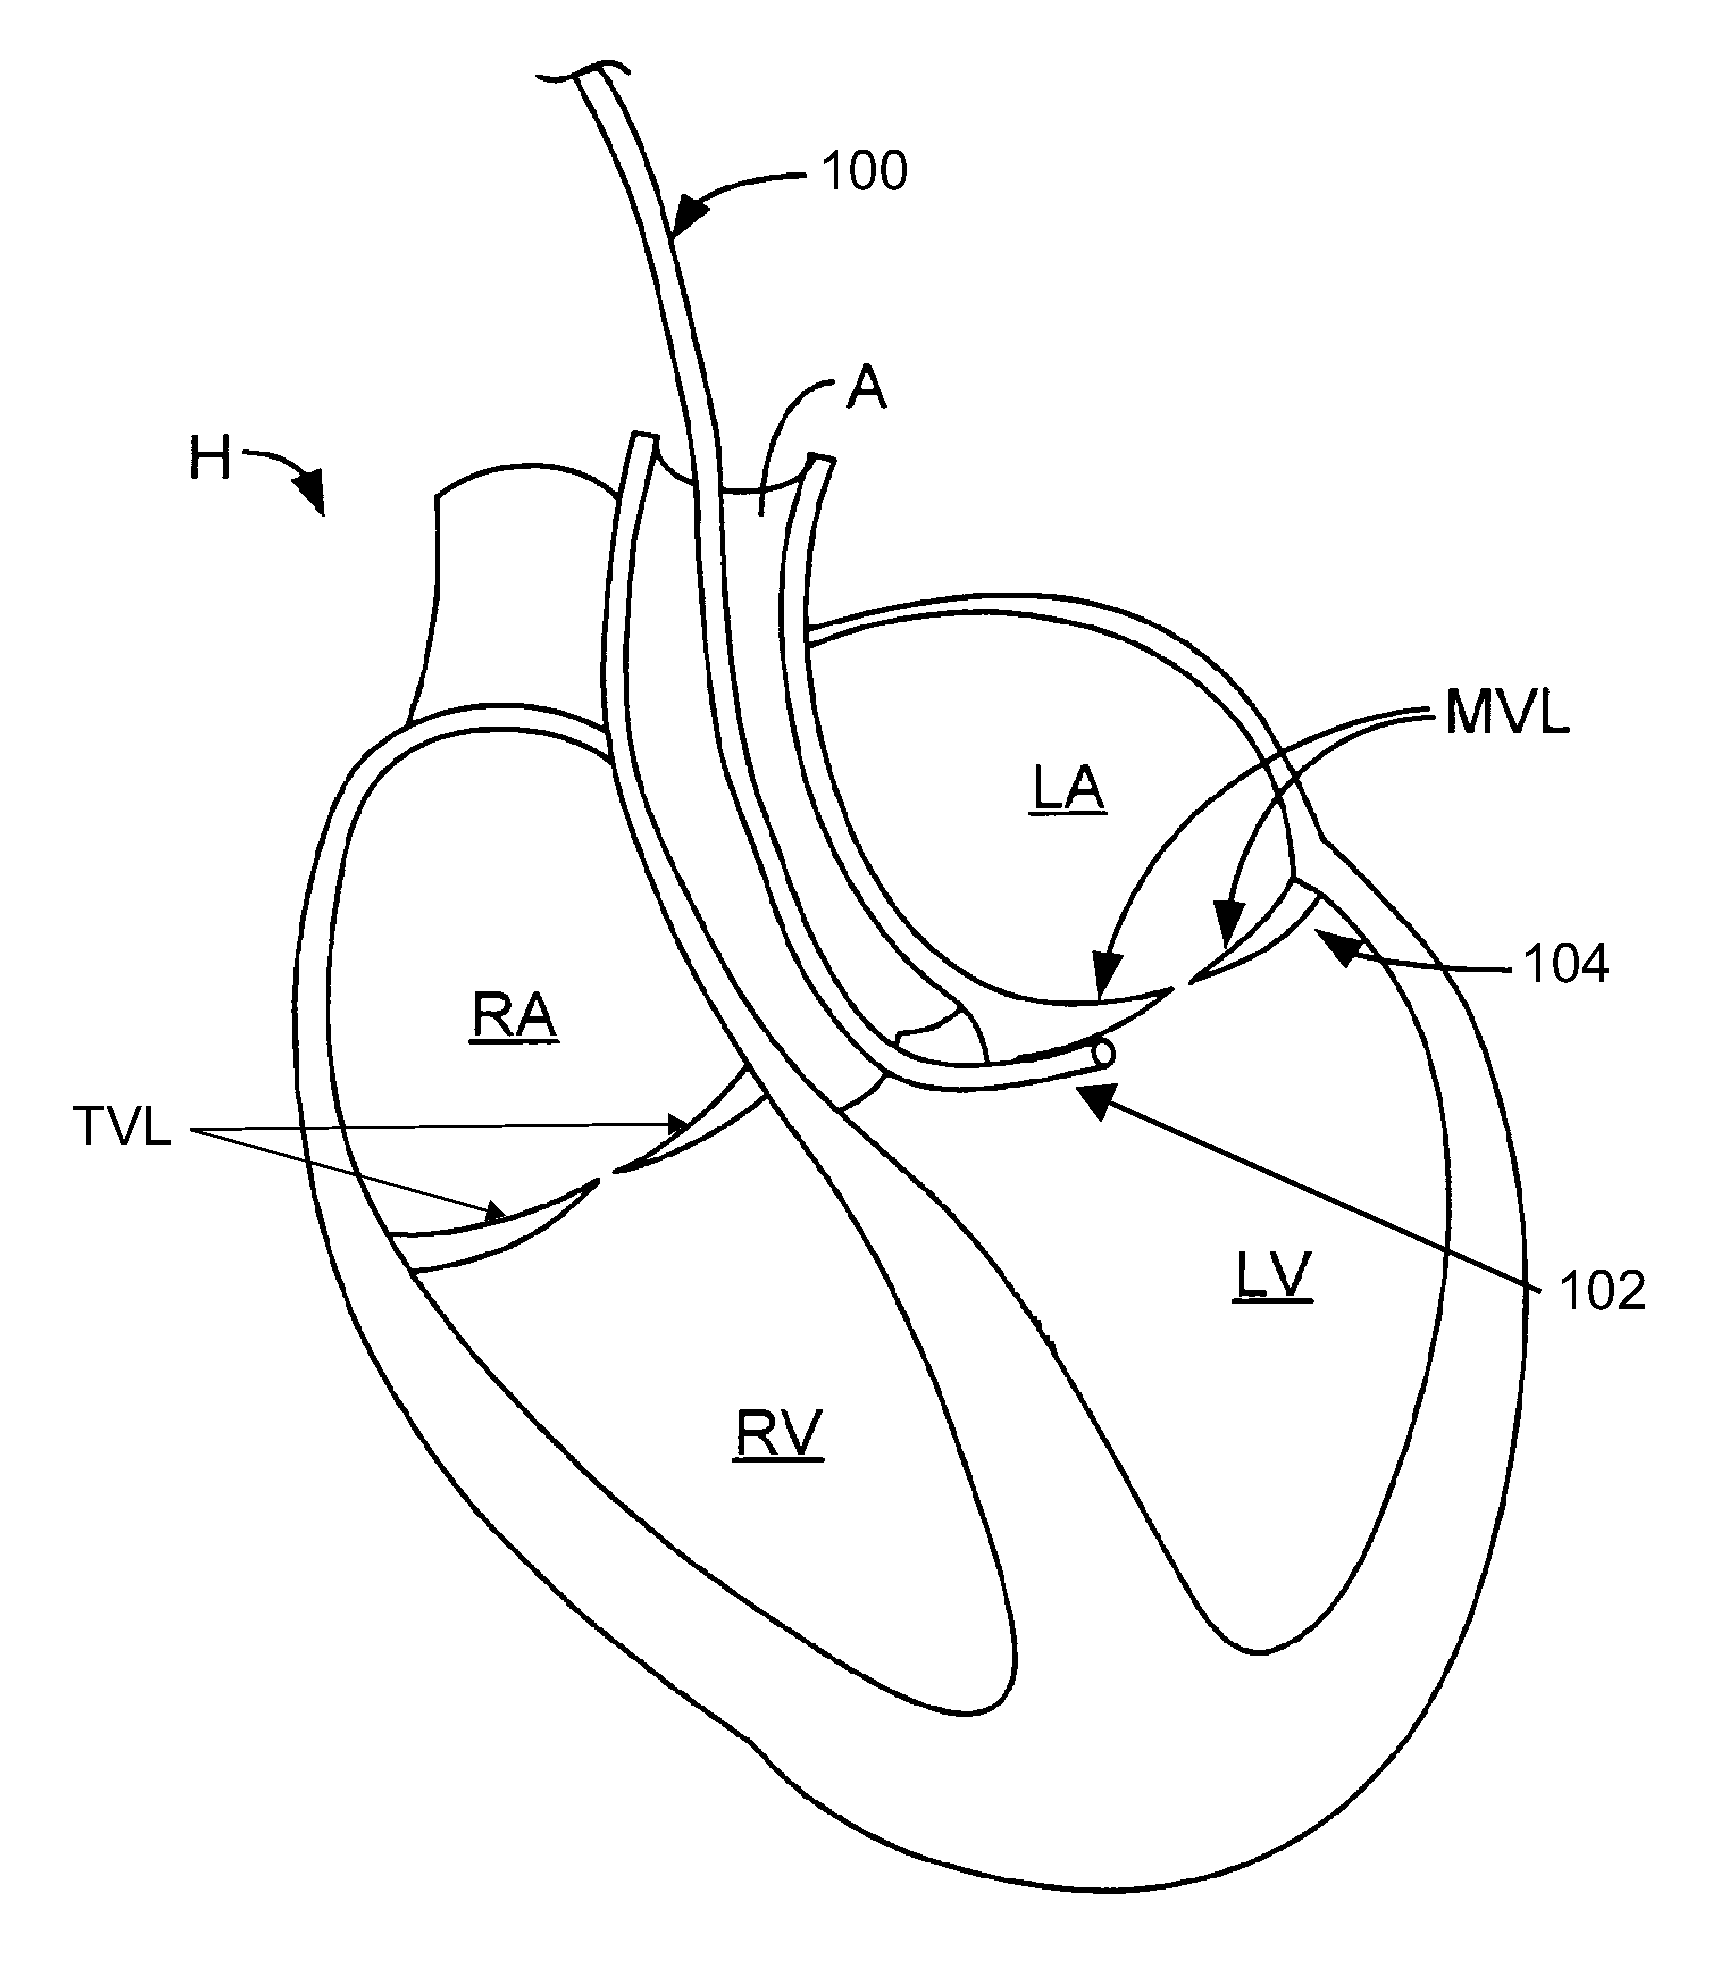 Systems and methods for cardiac remodeling